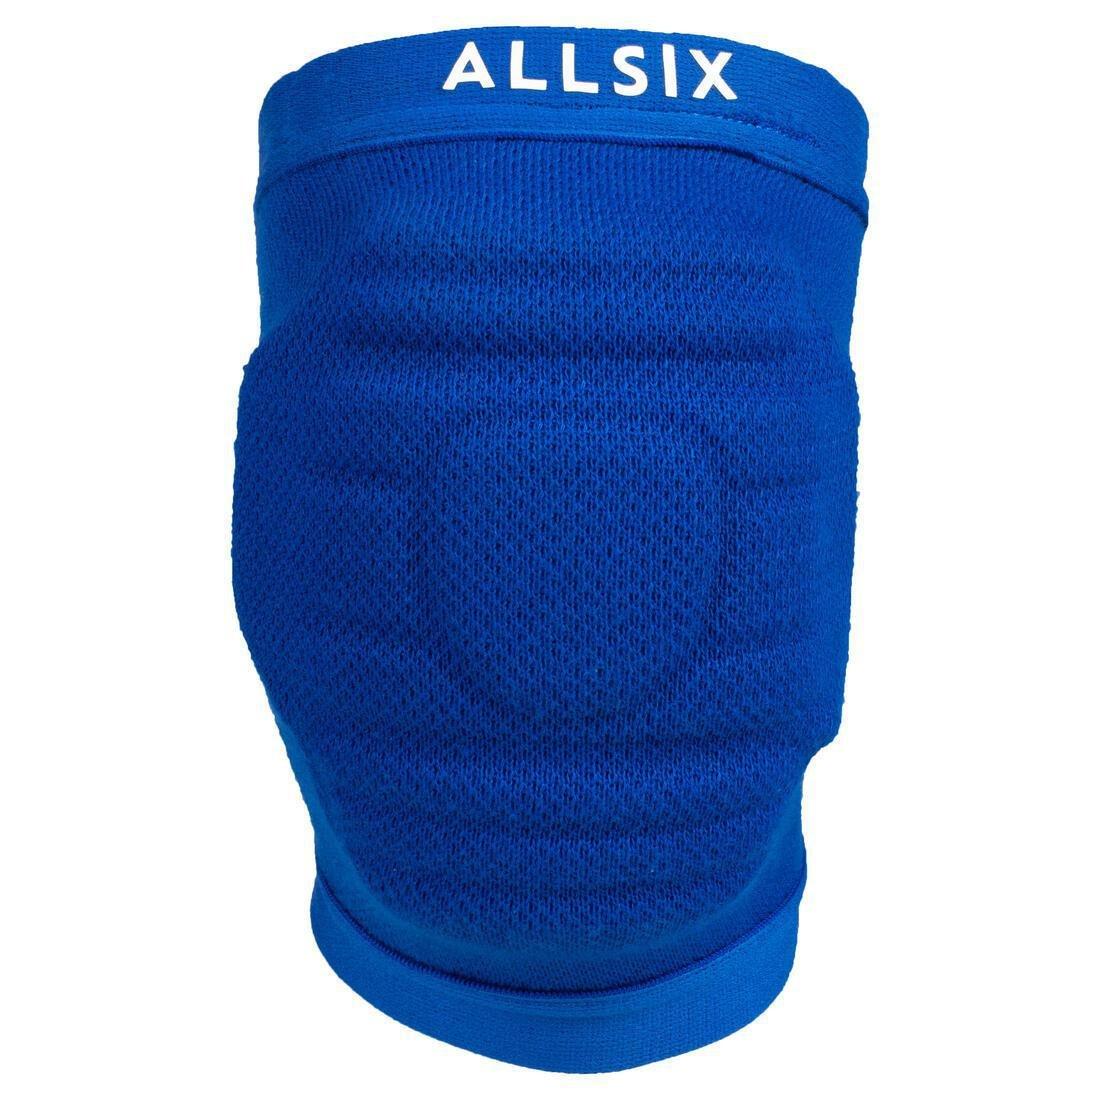 ALLSIX - Volleyball Knee Pads Vkp900, White